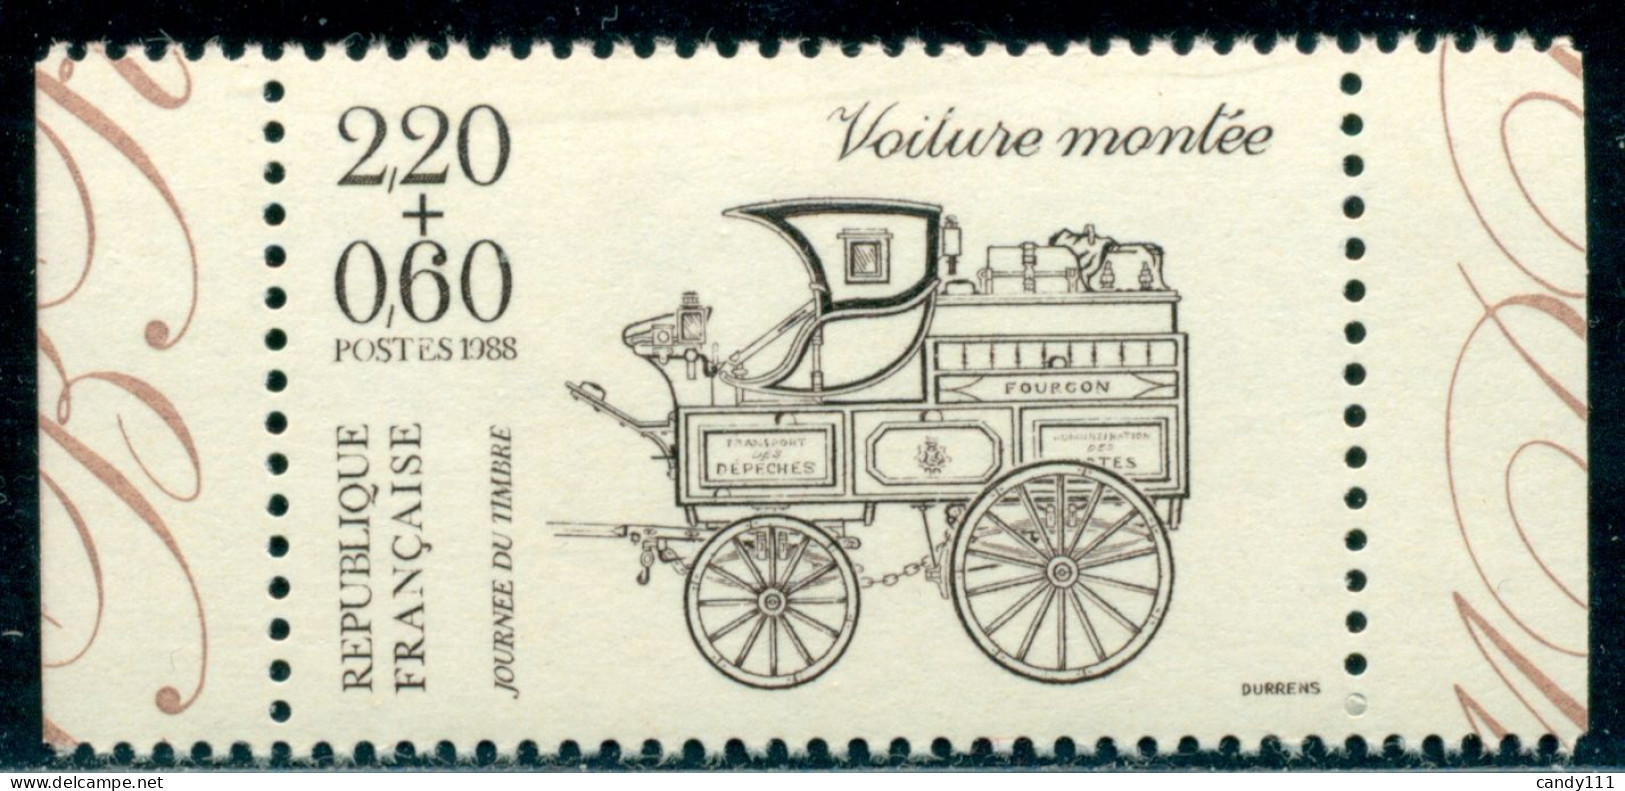 1988 Postal,post Coach,from Booklet,France,2662 Cb,MNH - Diligences